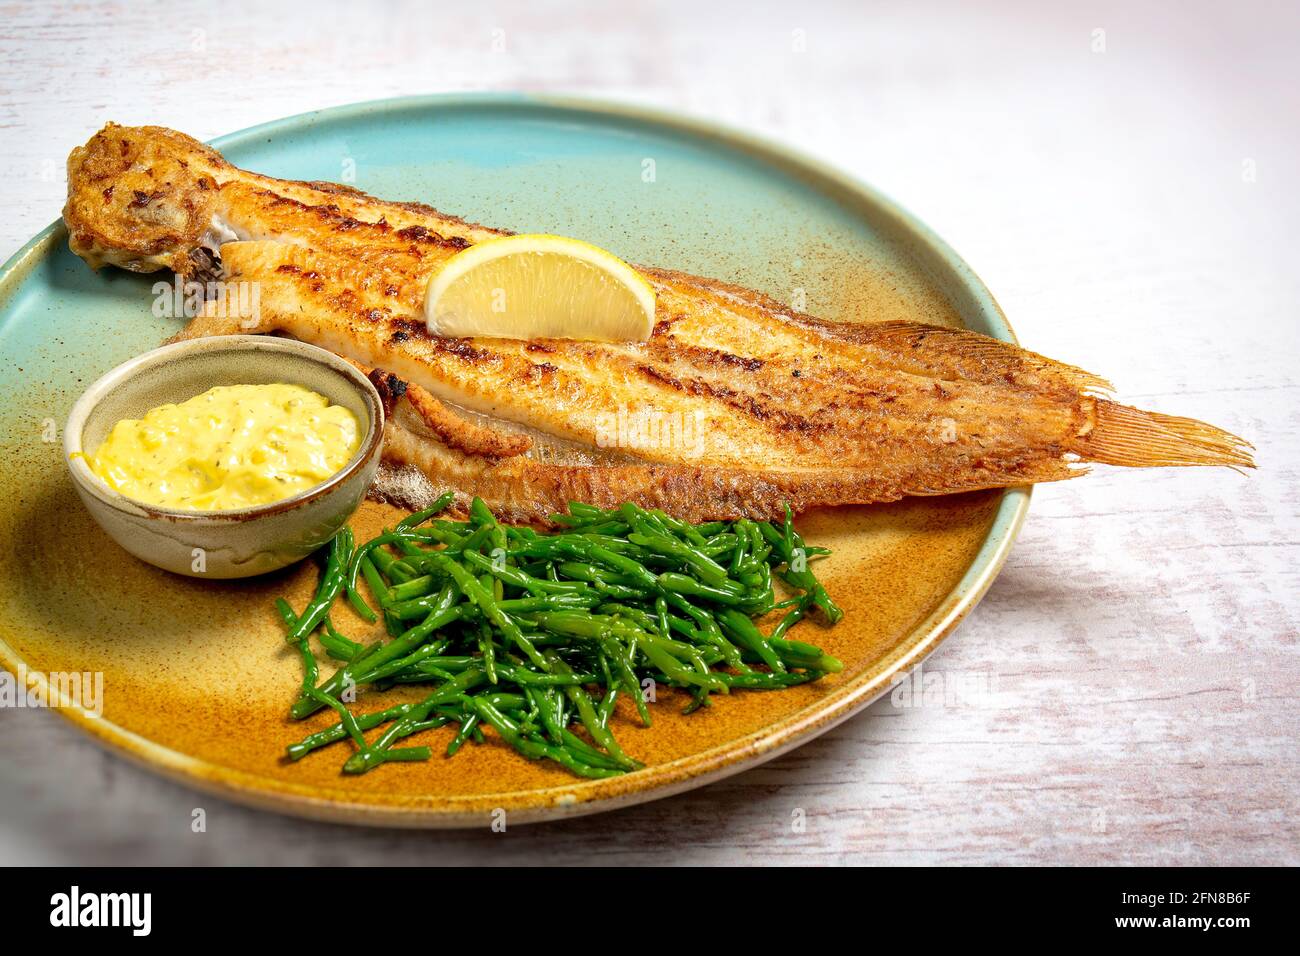 Baked whole flounder fish served on a colorful plate with lemon, samphire and buttersauce Stock Photo